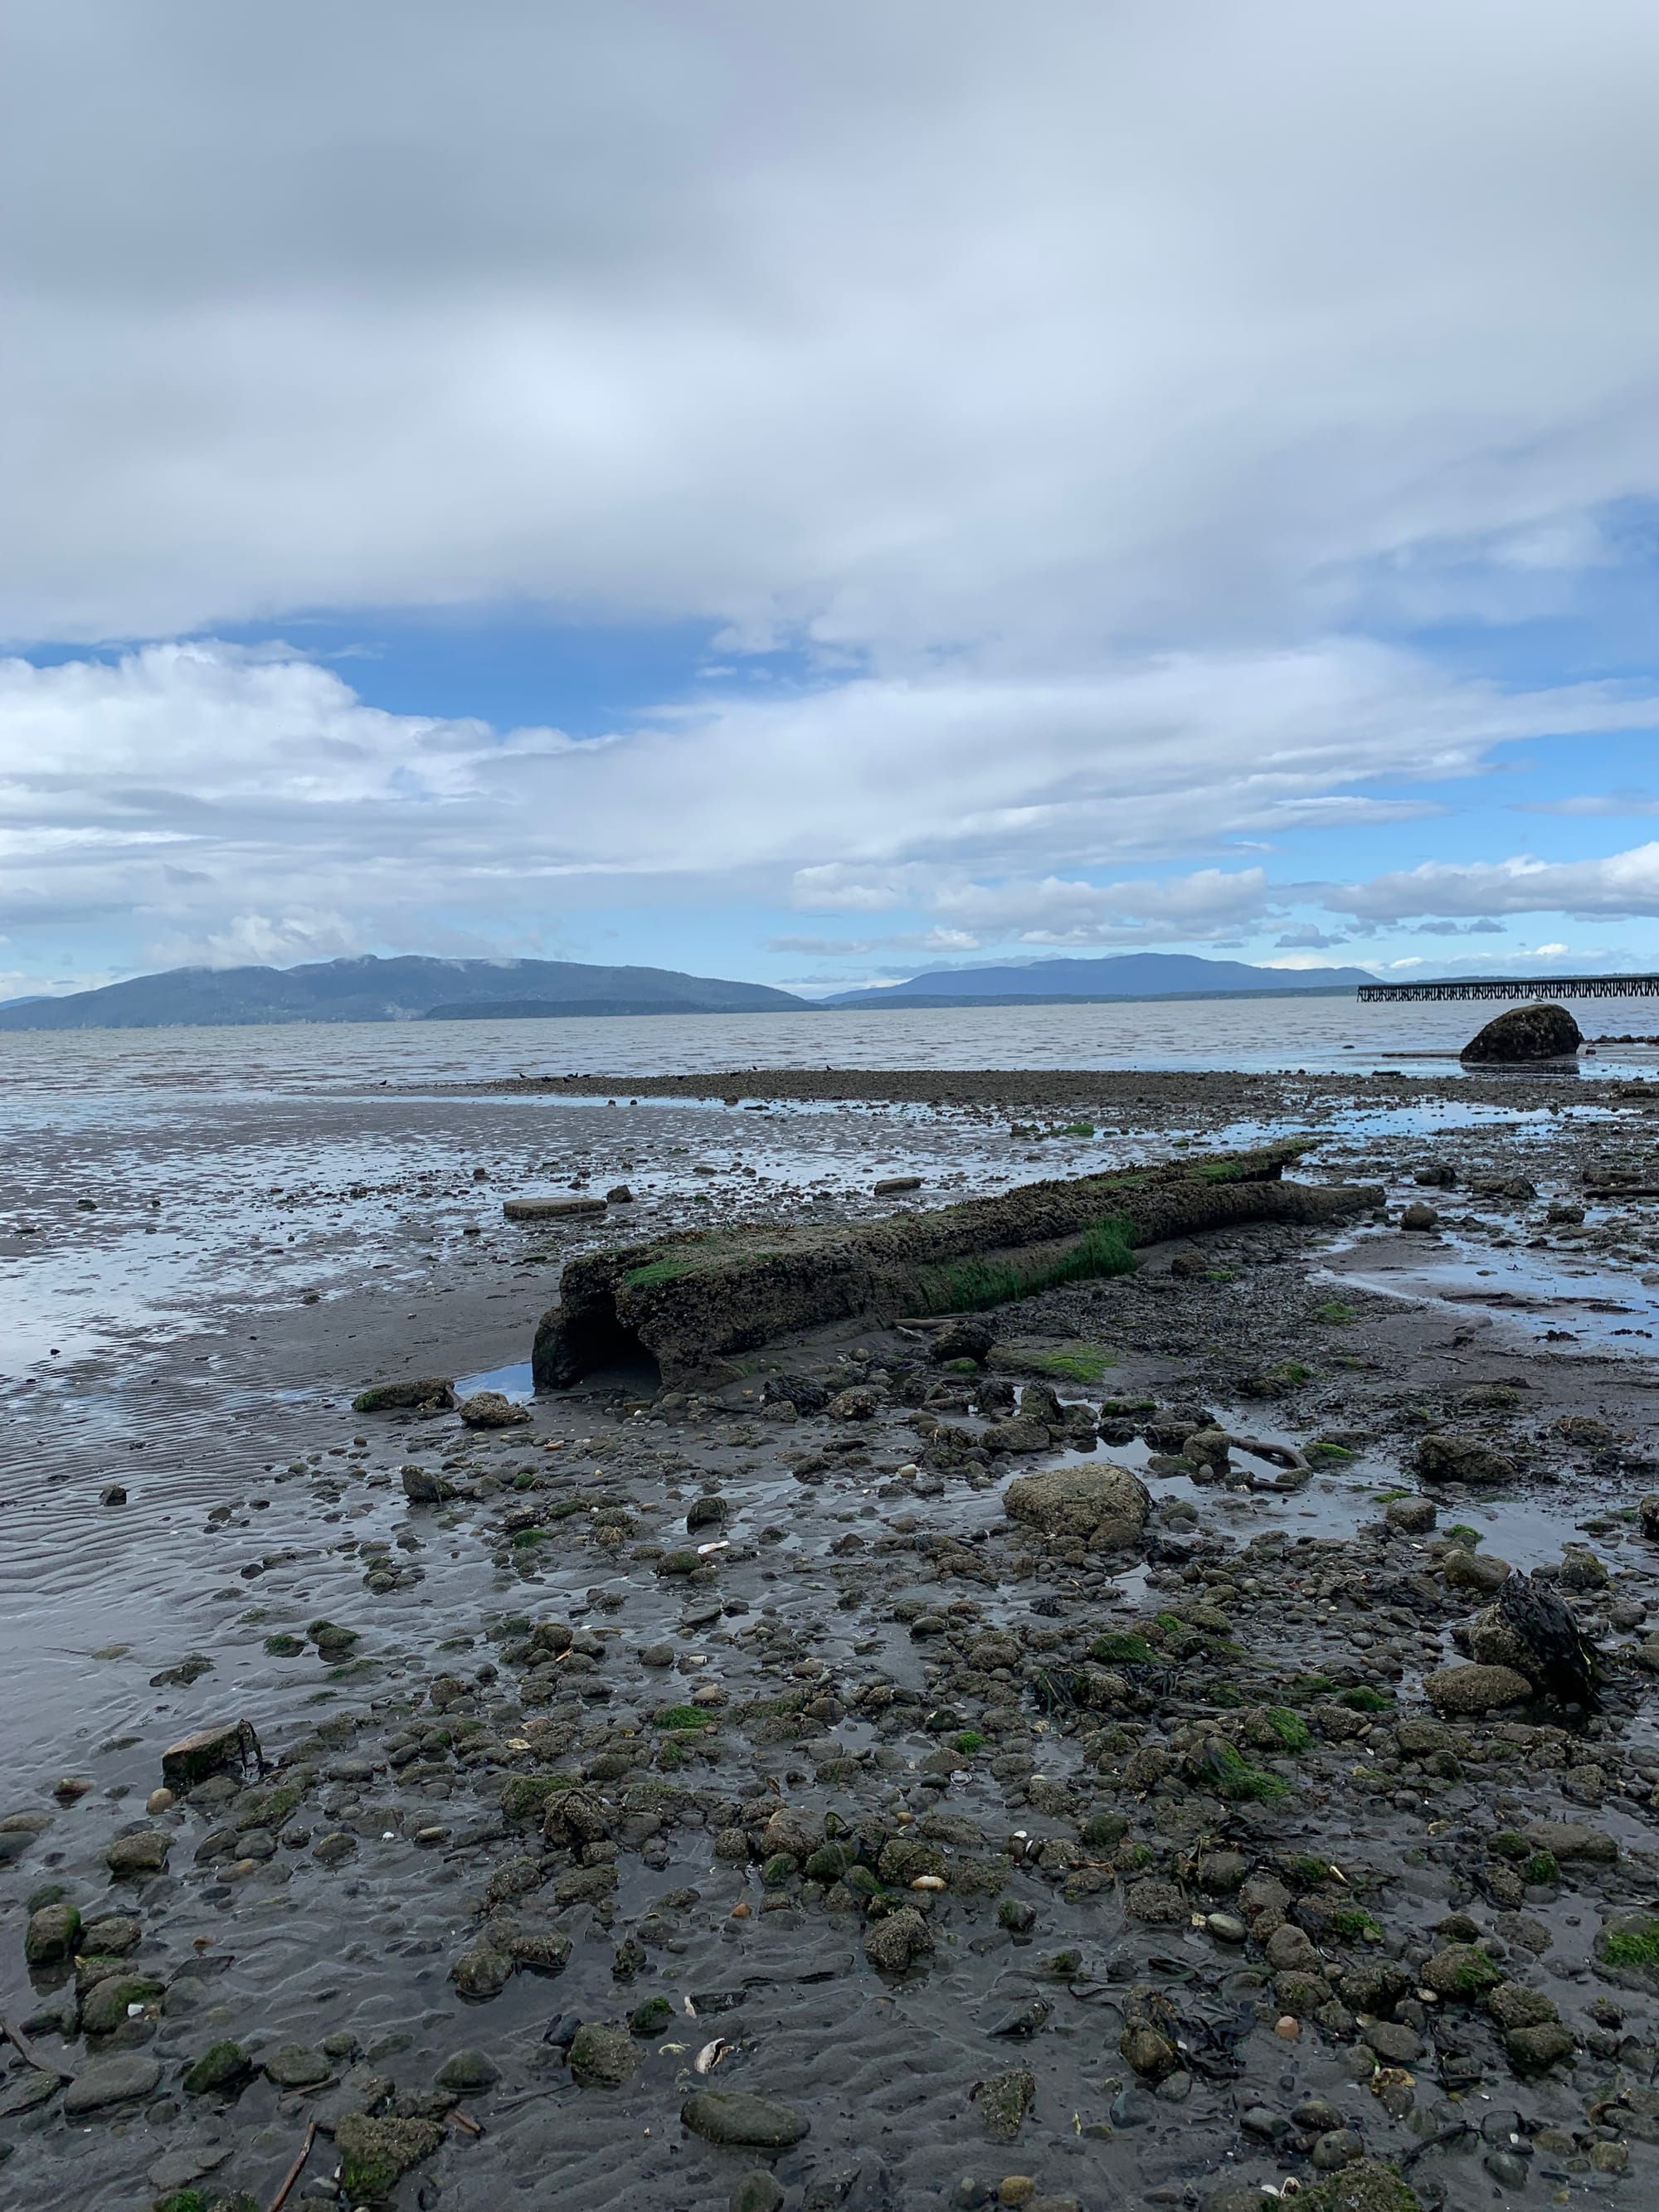 muddy beach, rotting log, grey water, green islands, blue sky with lots of clouds